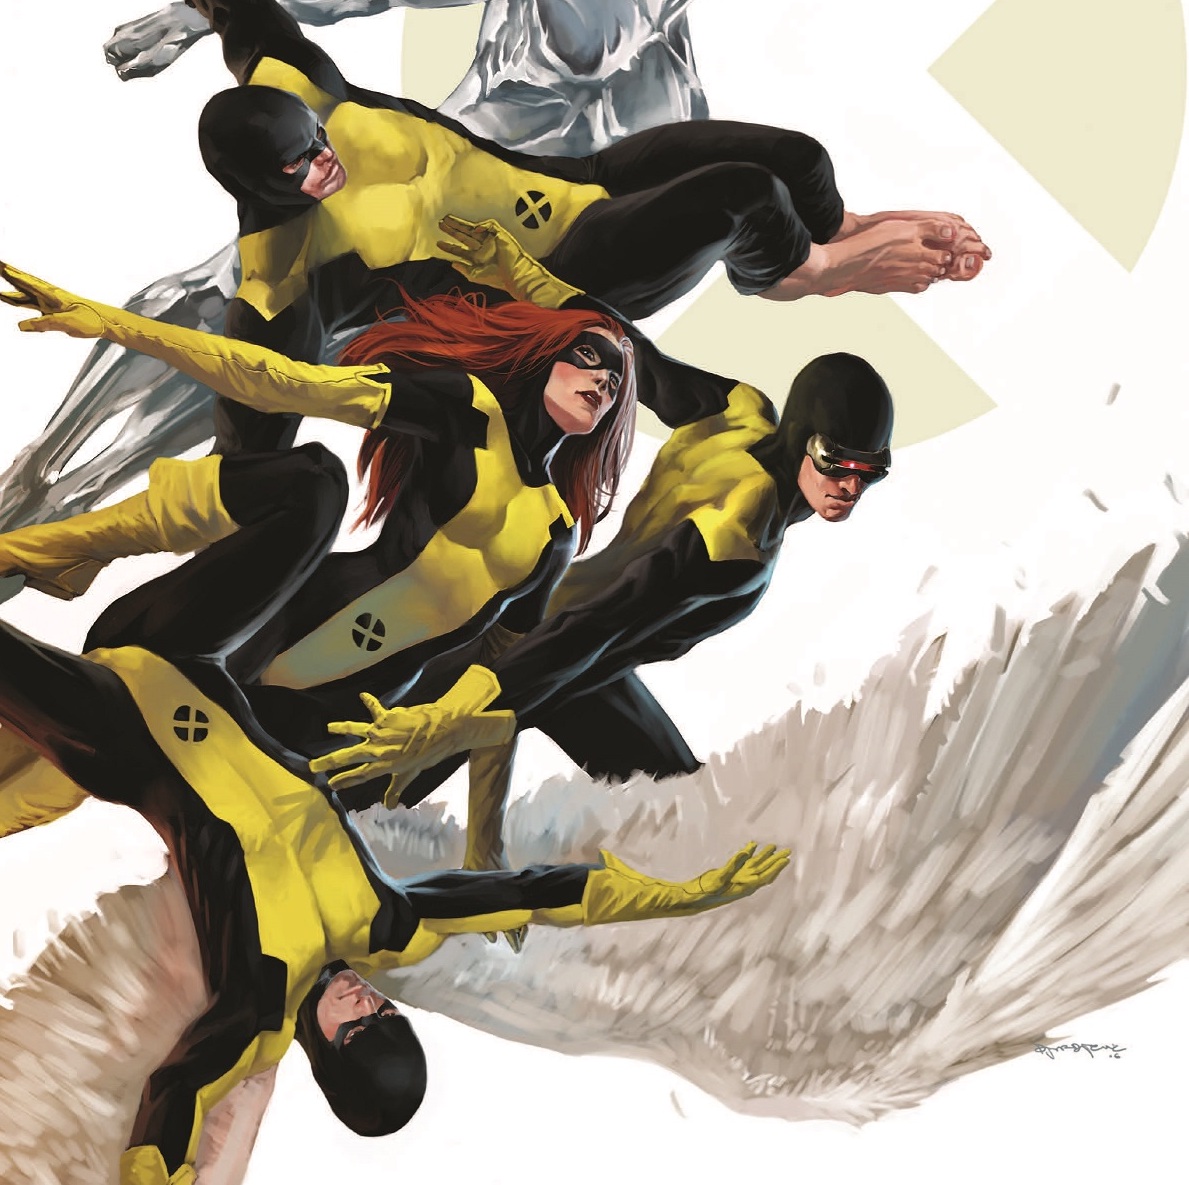 'X-Men: First Class - Mutants 101' is a charming rewrite of the past